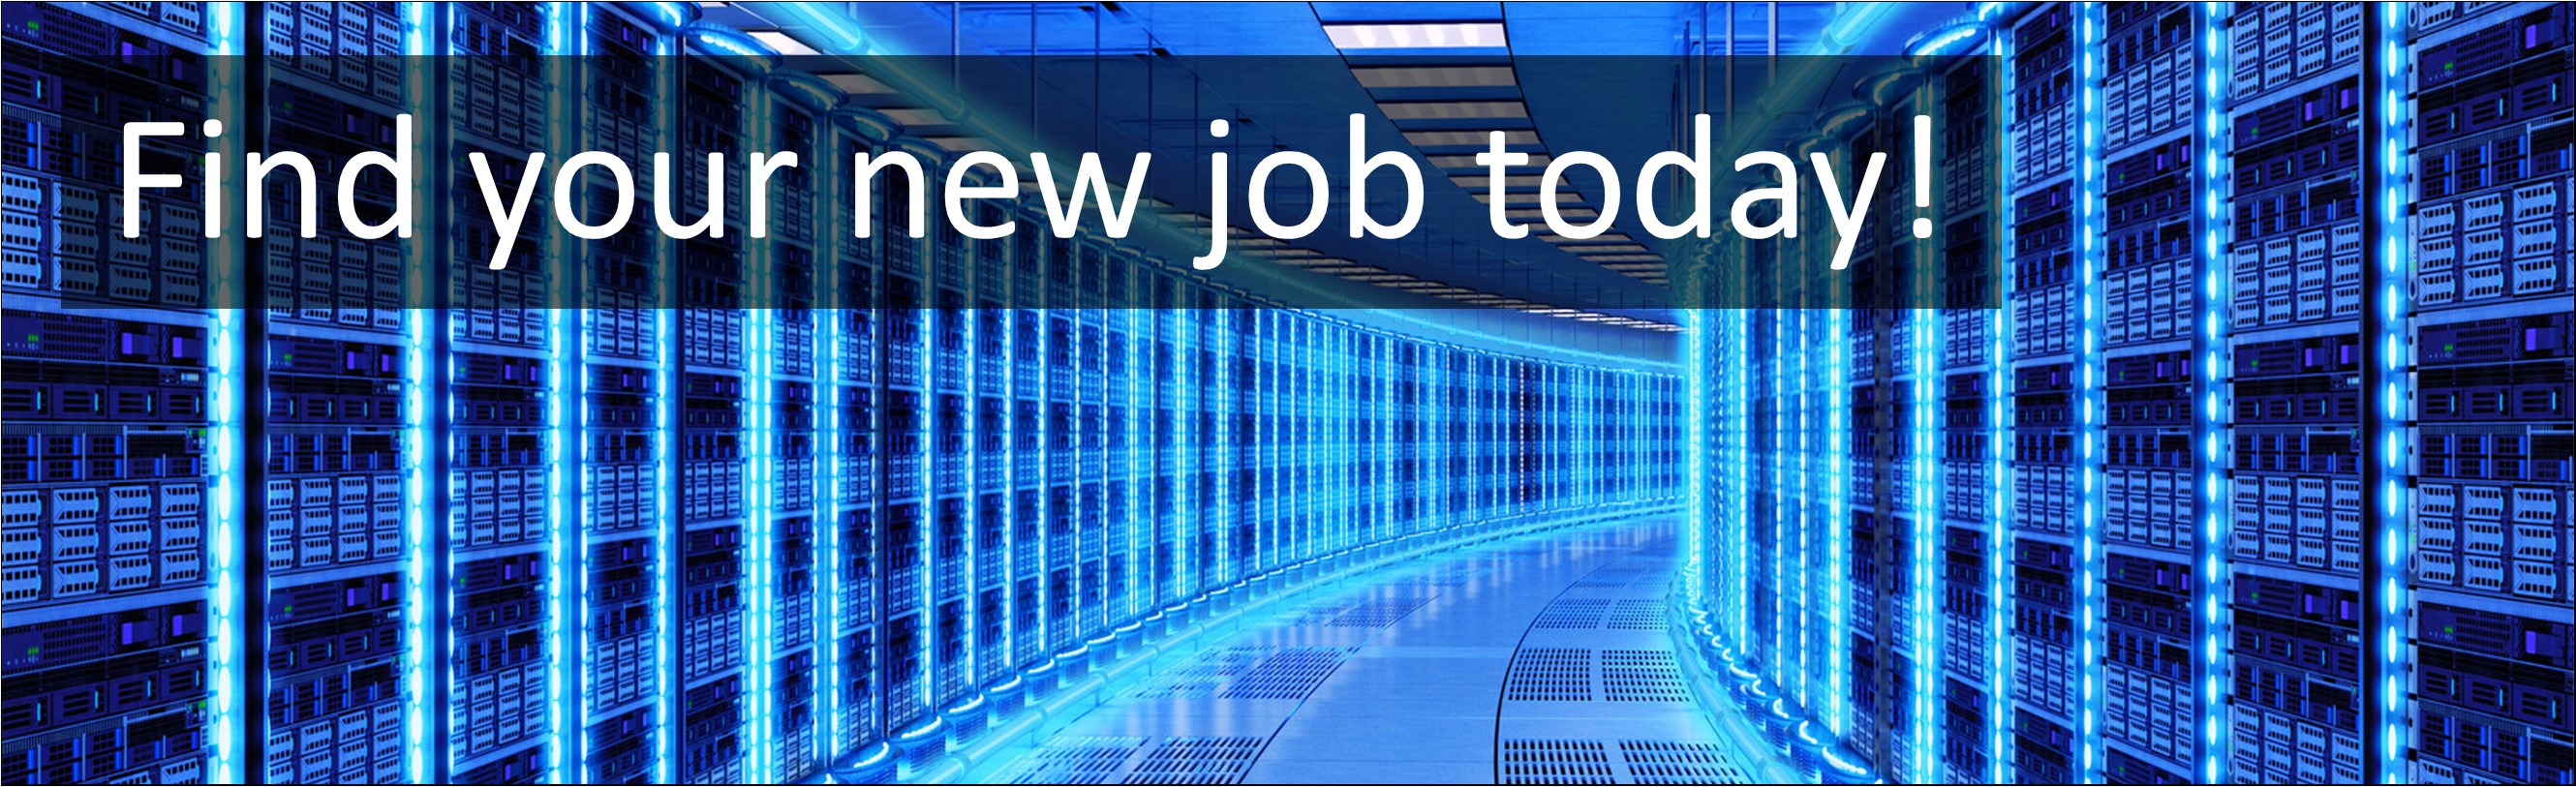 IT & Communication Jobs..Net Developer / Software Engineer Jobs, Careers & Vacancies in Nottingham, Nottinghamshire, East Midlands Advertised by AWD online – Multi-Job Board Advertising and CV Sourcing Recruitment Services